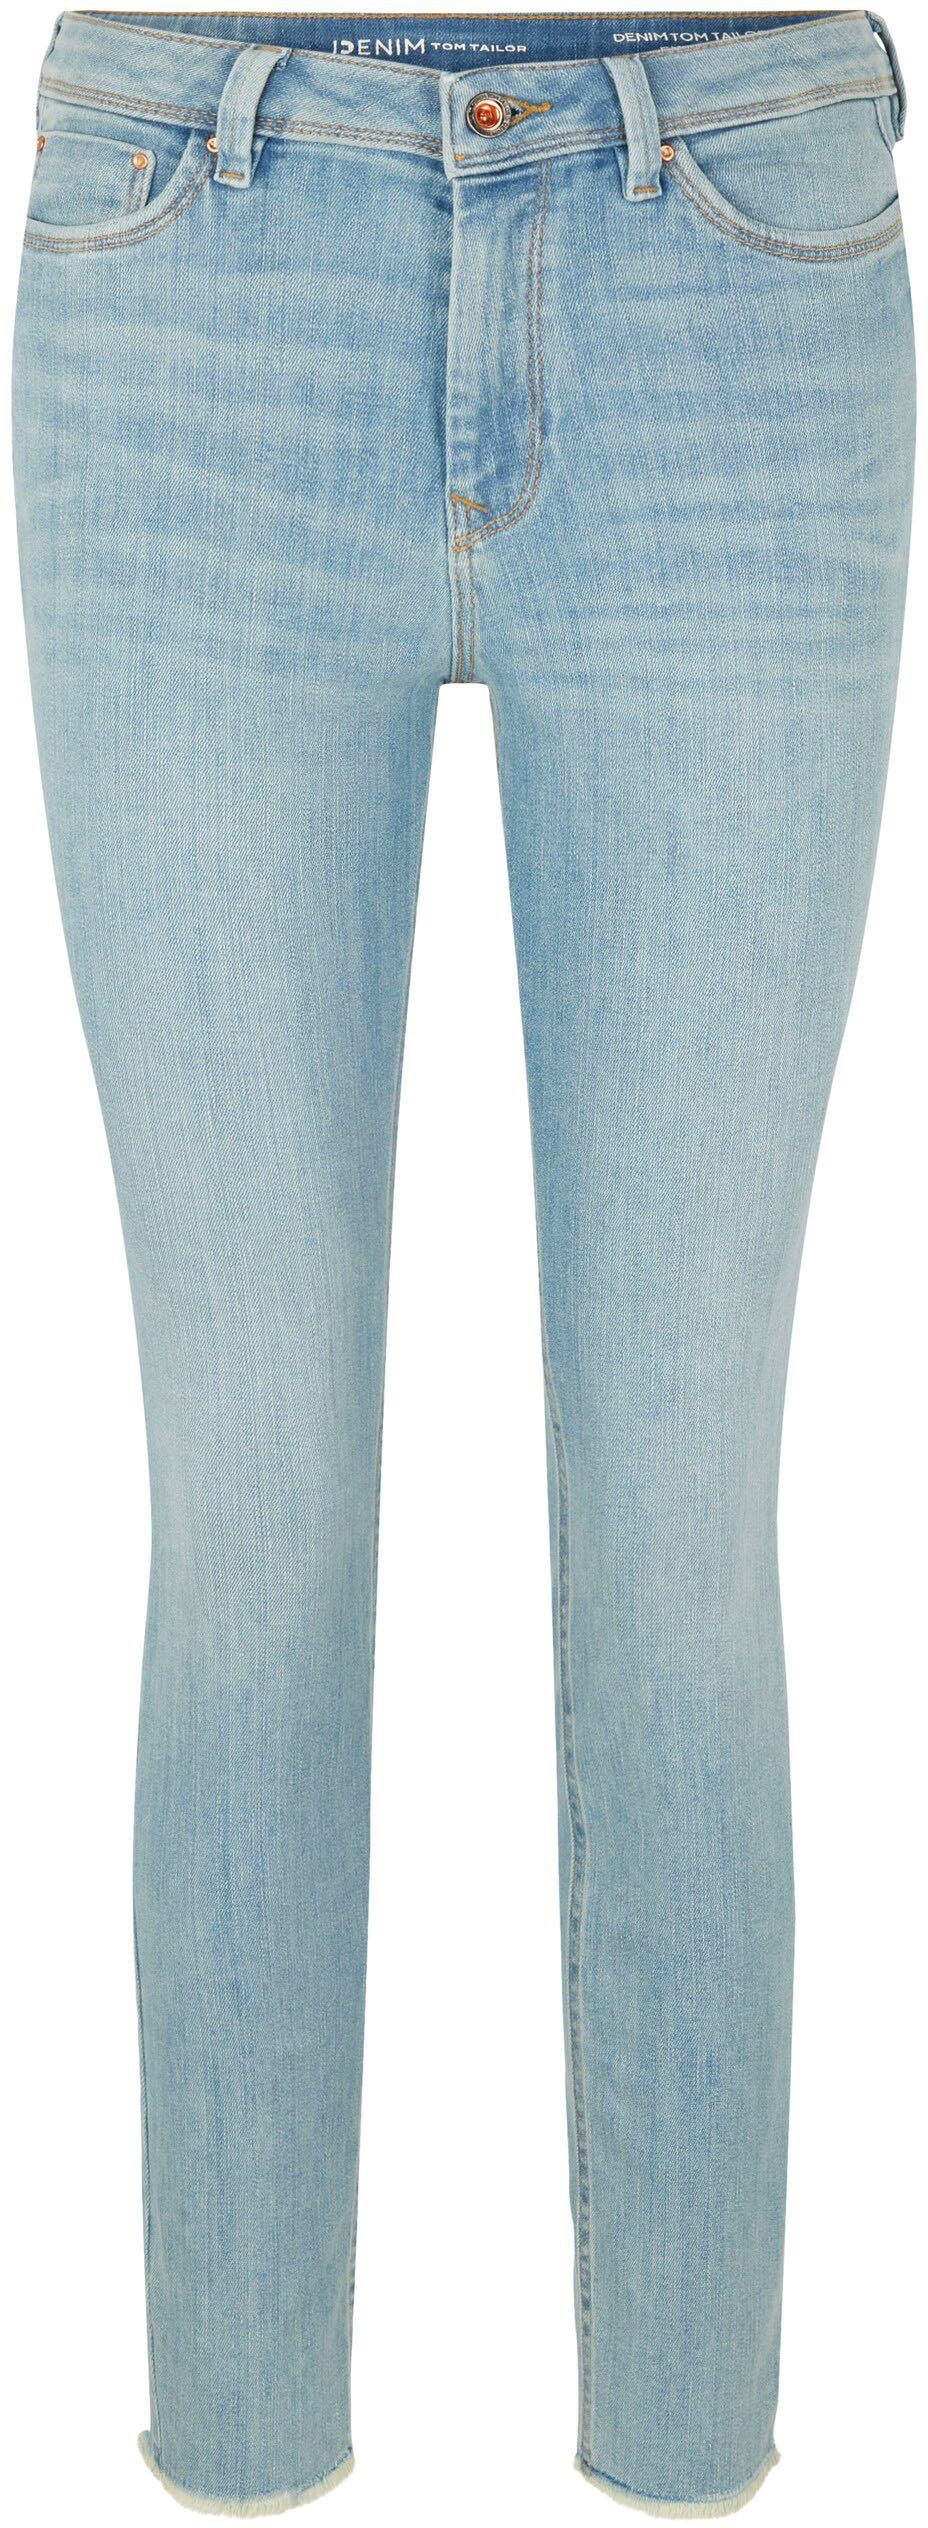 Jeans TOM used TAILOR Ankle light Skinny mit Extra Ankle-Jeans Denim ausgefranstem Beinabschluss